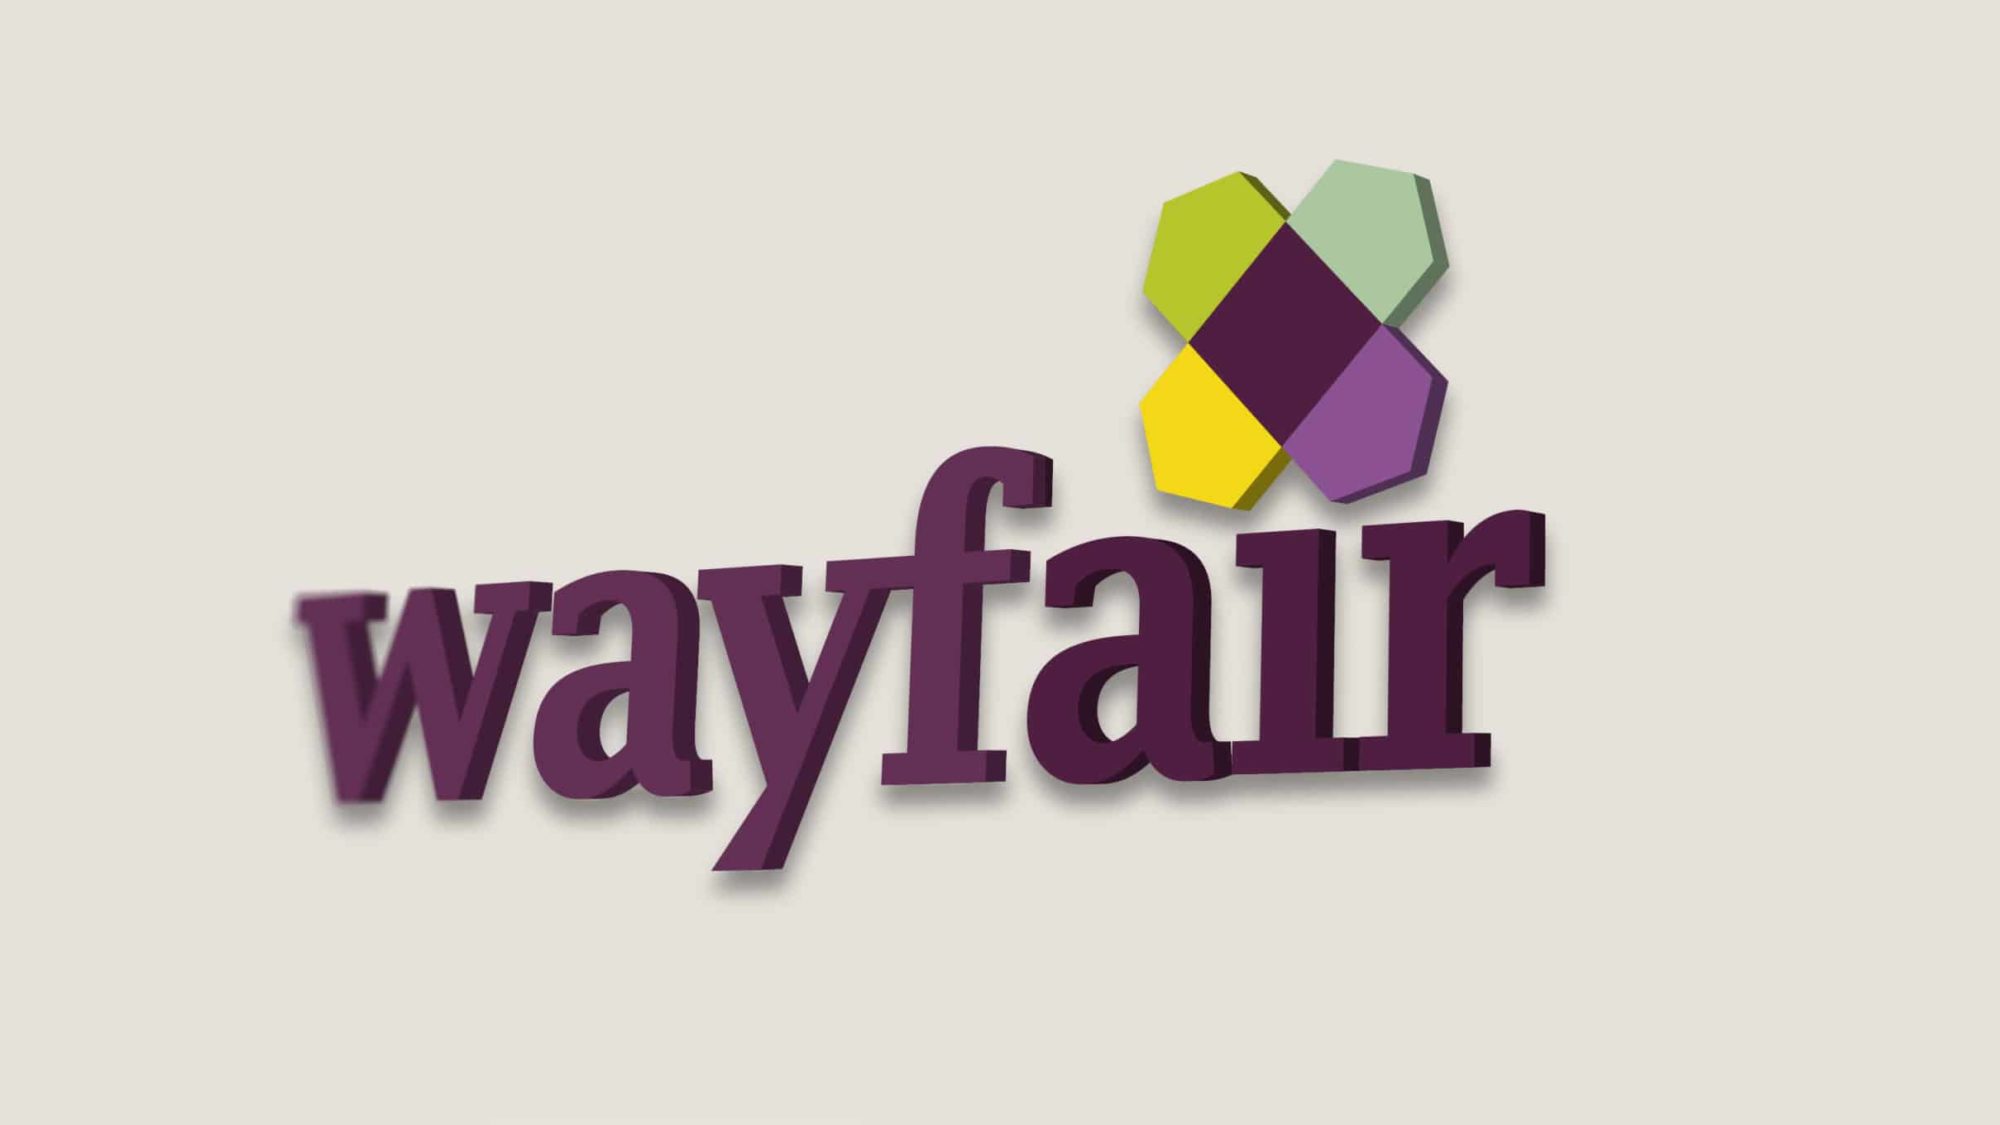 Wayfair adds new features to its website